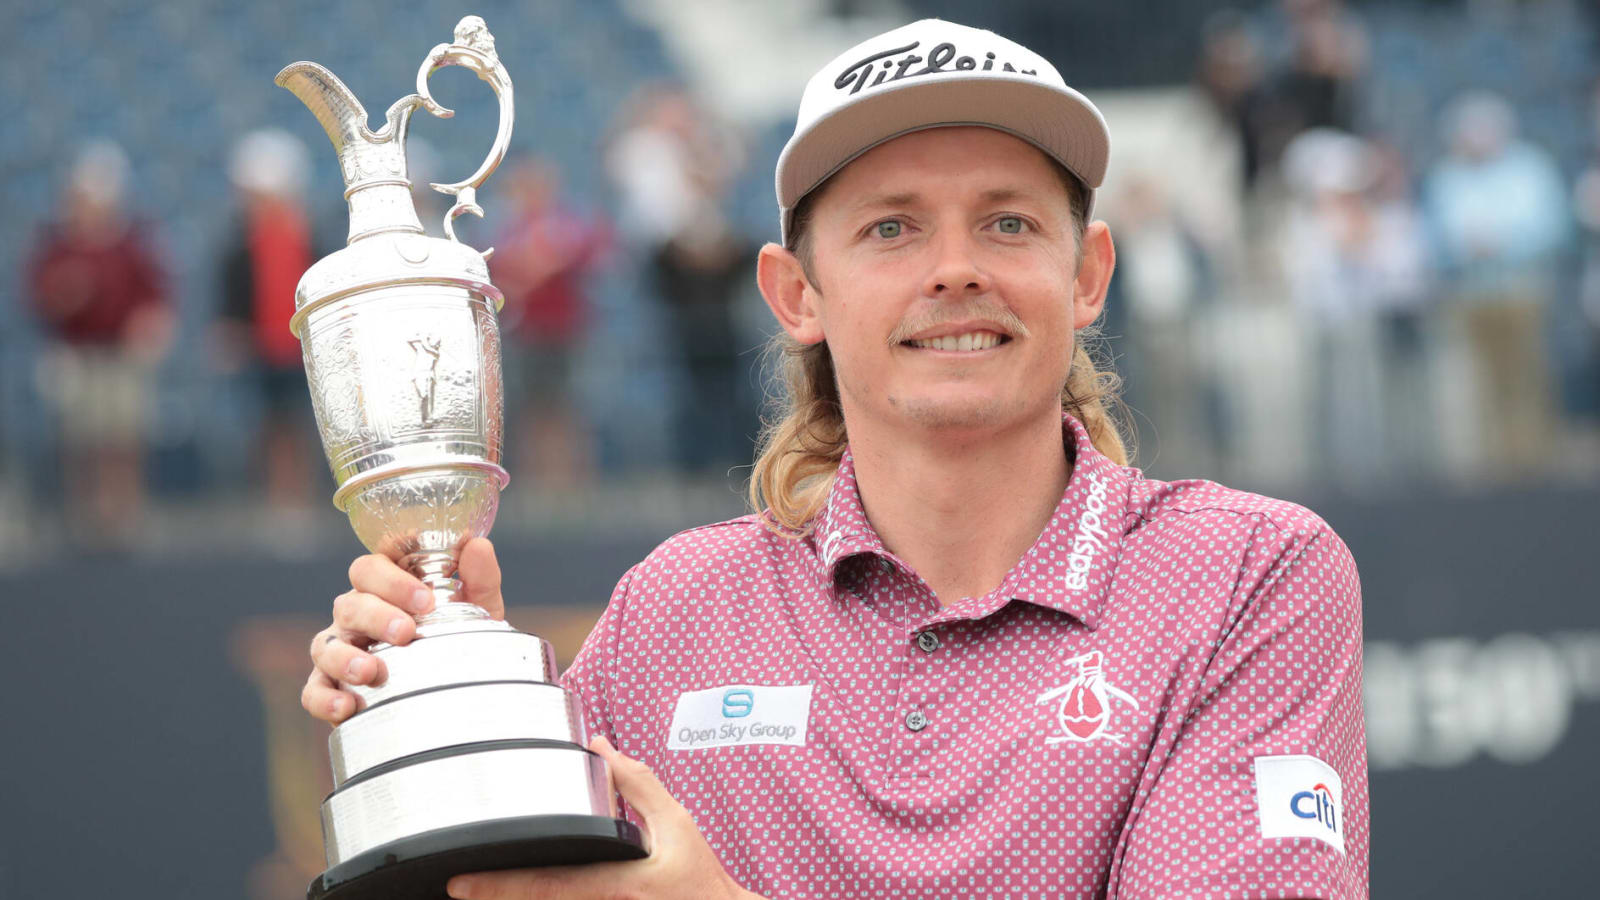 Cameron Smith wins 150th British Open with final round surge